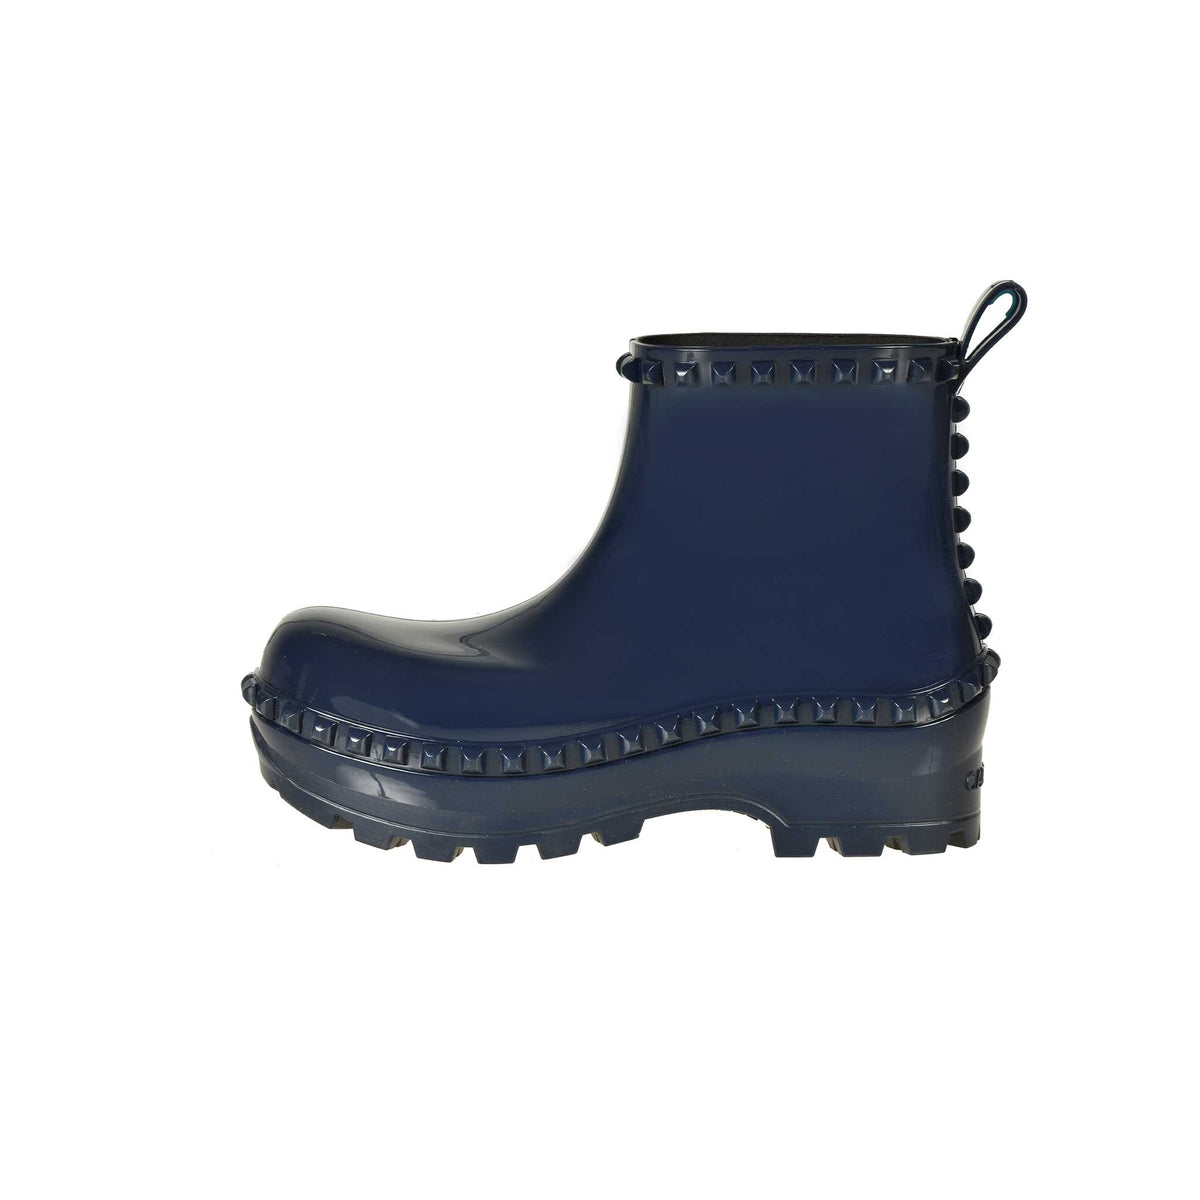 Rose scented Graziano boots for women in color navy blue